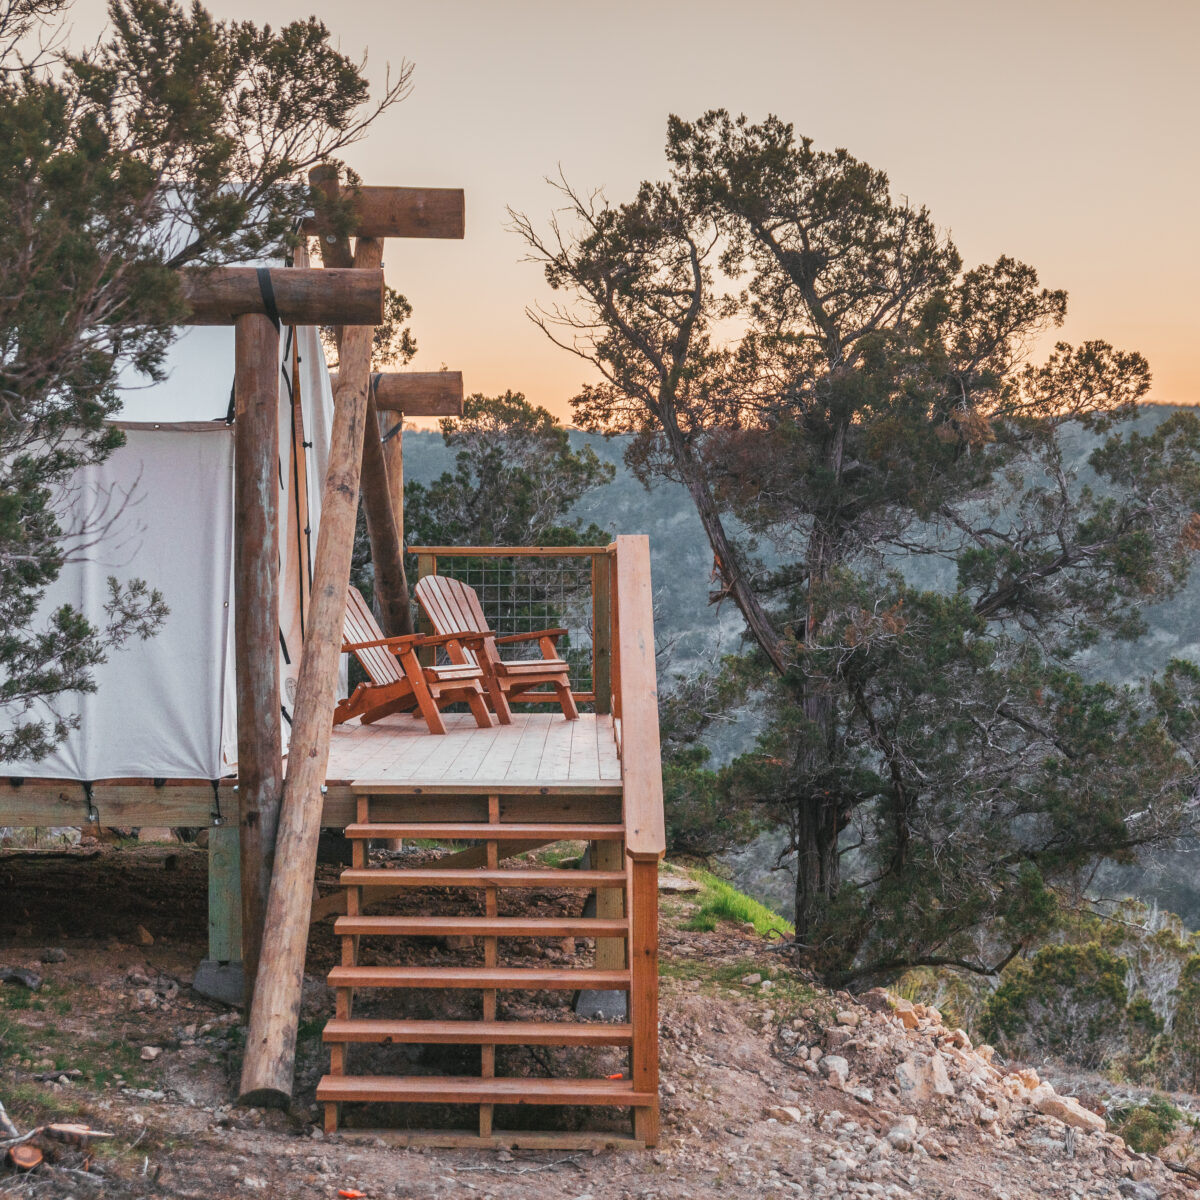 The Best Glamping Hotels If You’d Rather Die Than Camp Without AC Or Wifi